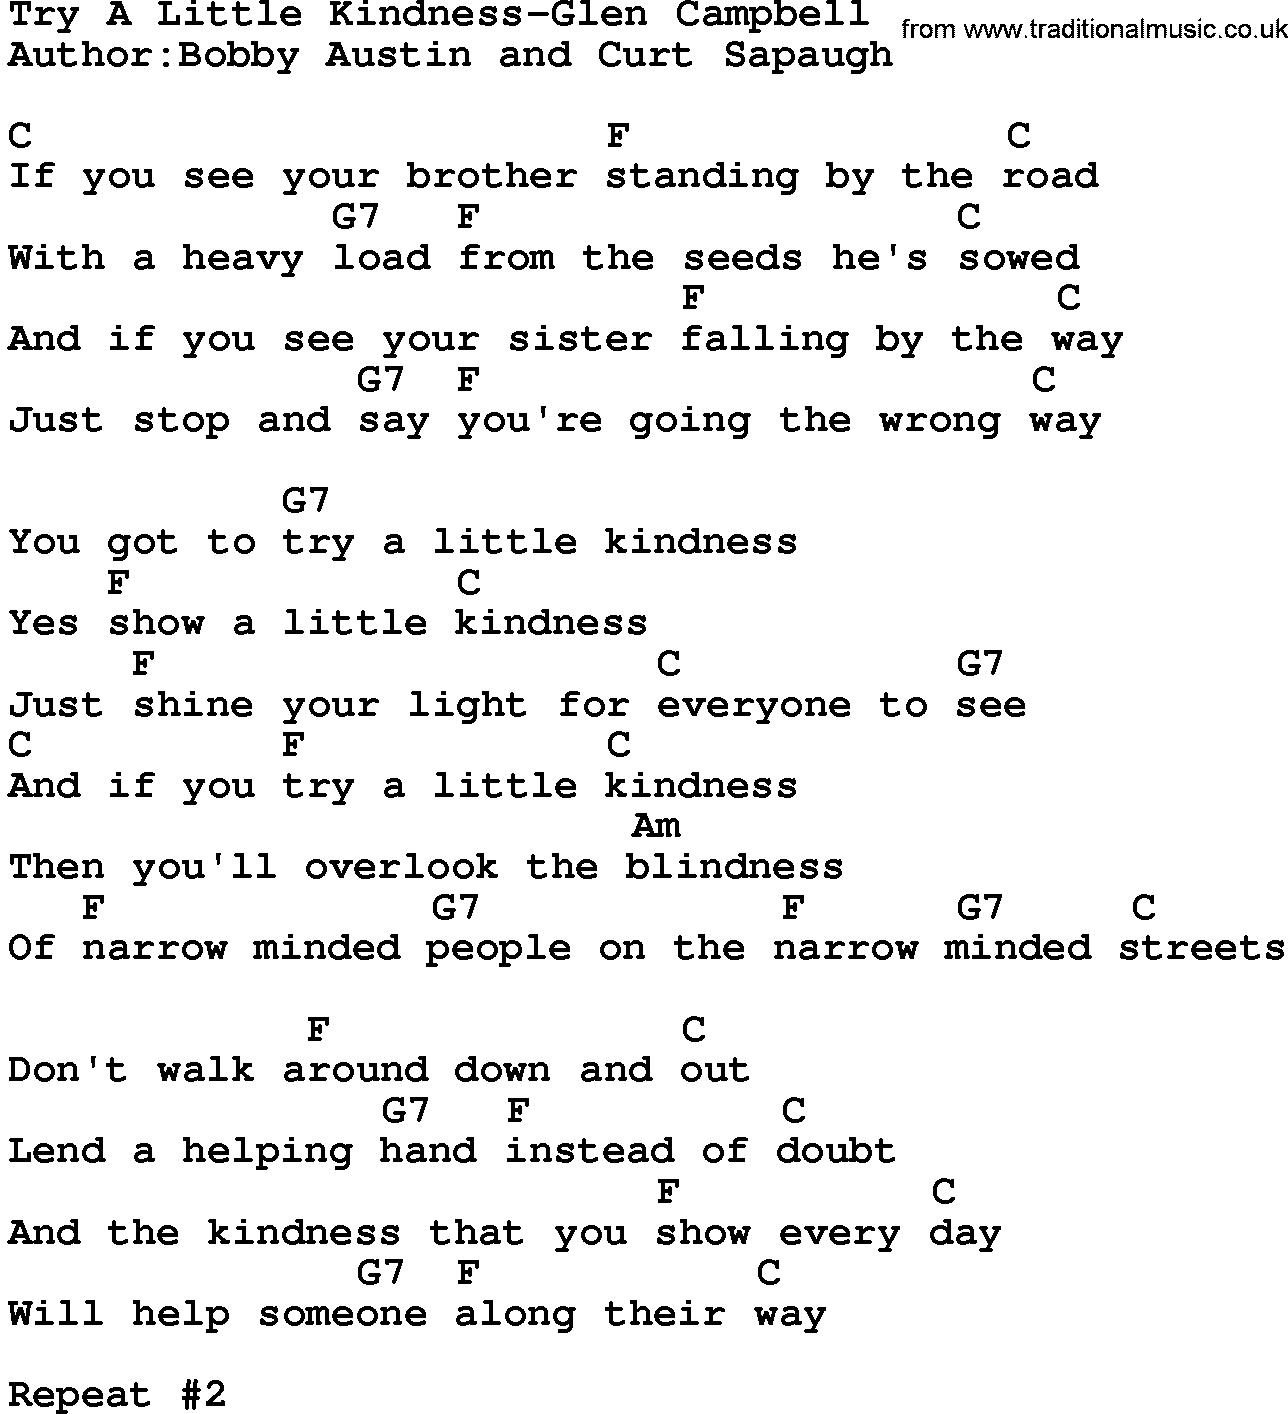 Country music song: Try A Little Kindness-Glen Campbell lyrics and chords